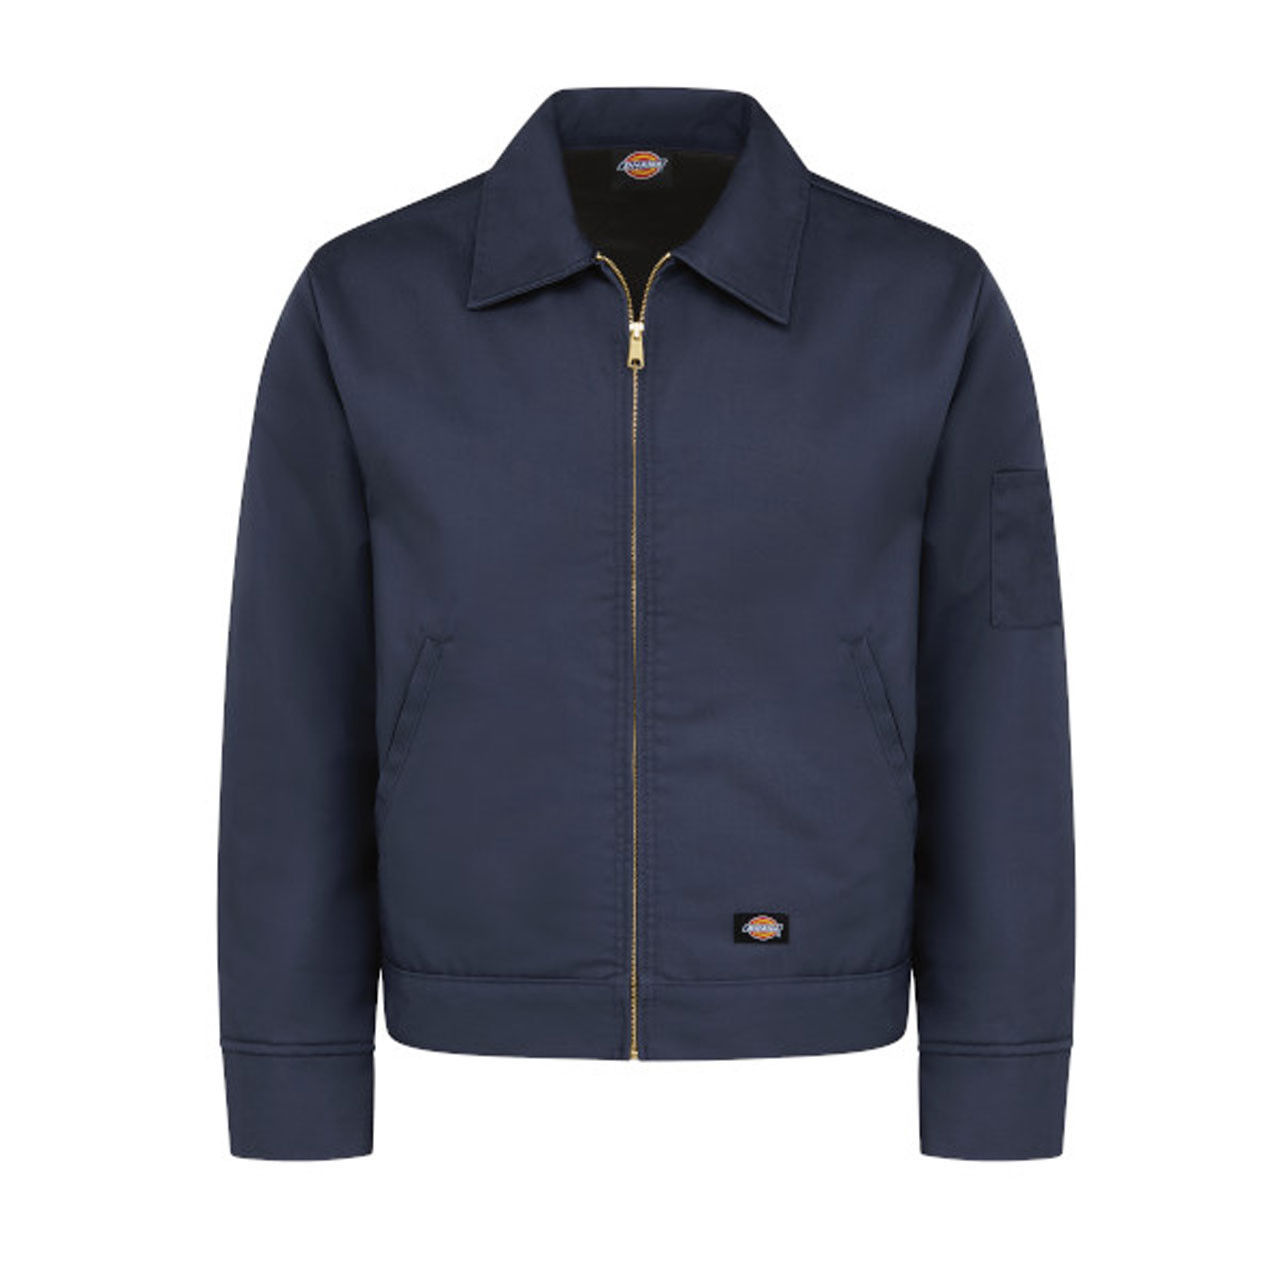 Does the Dickies Eisenhower Jacket have pockets?